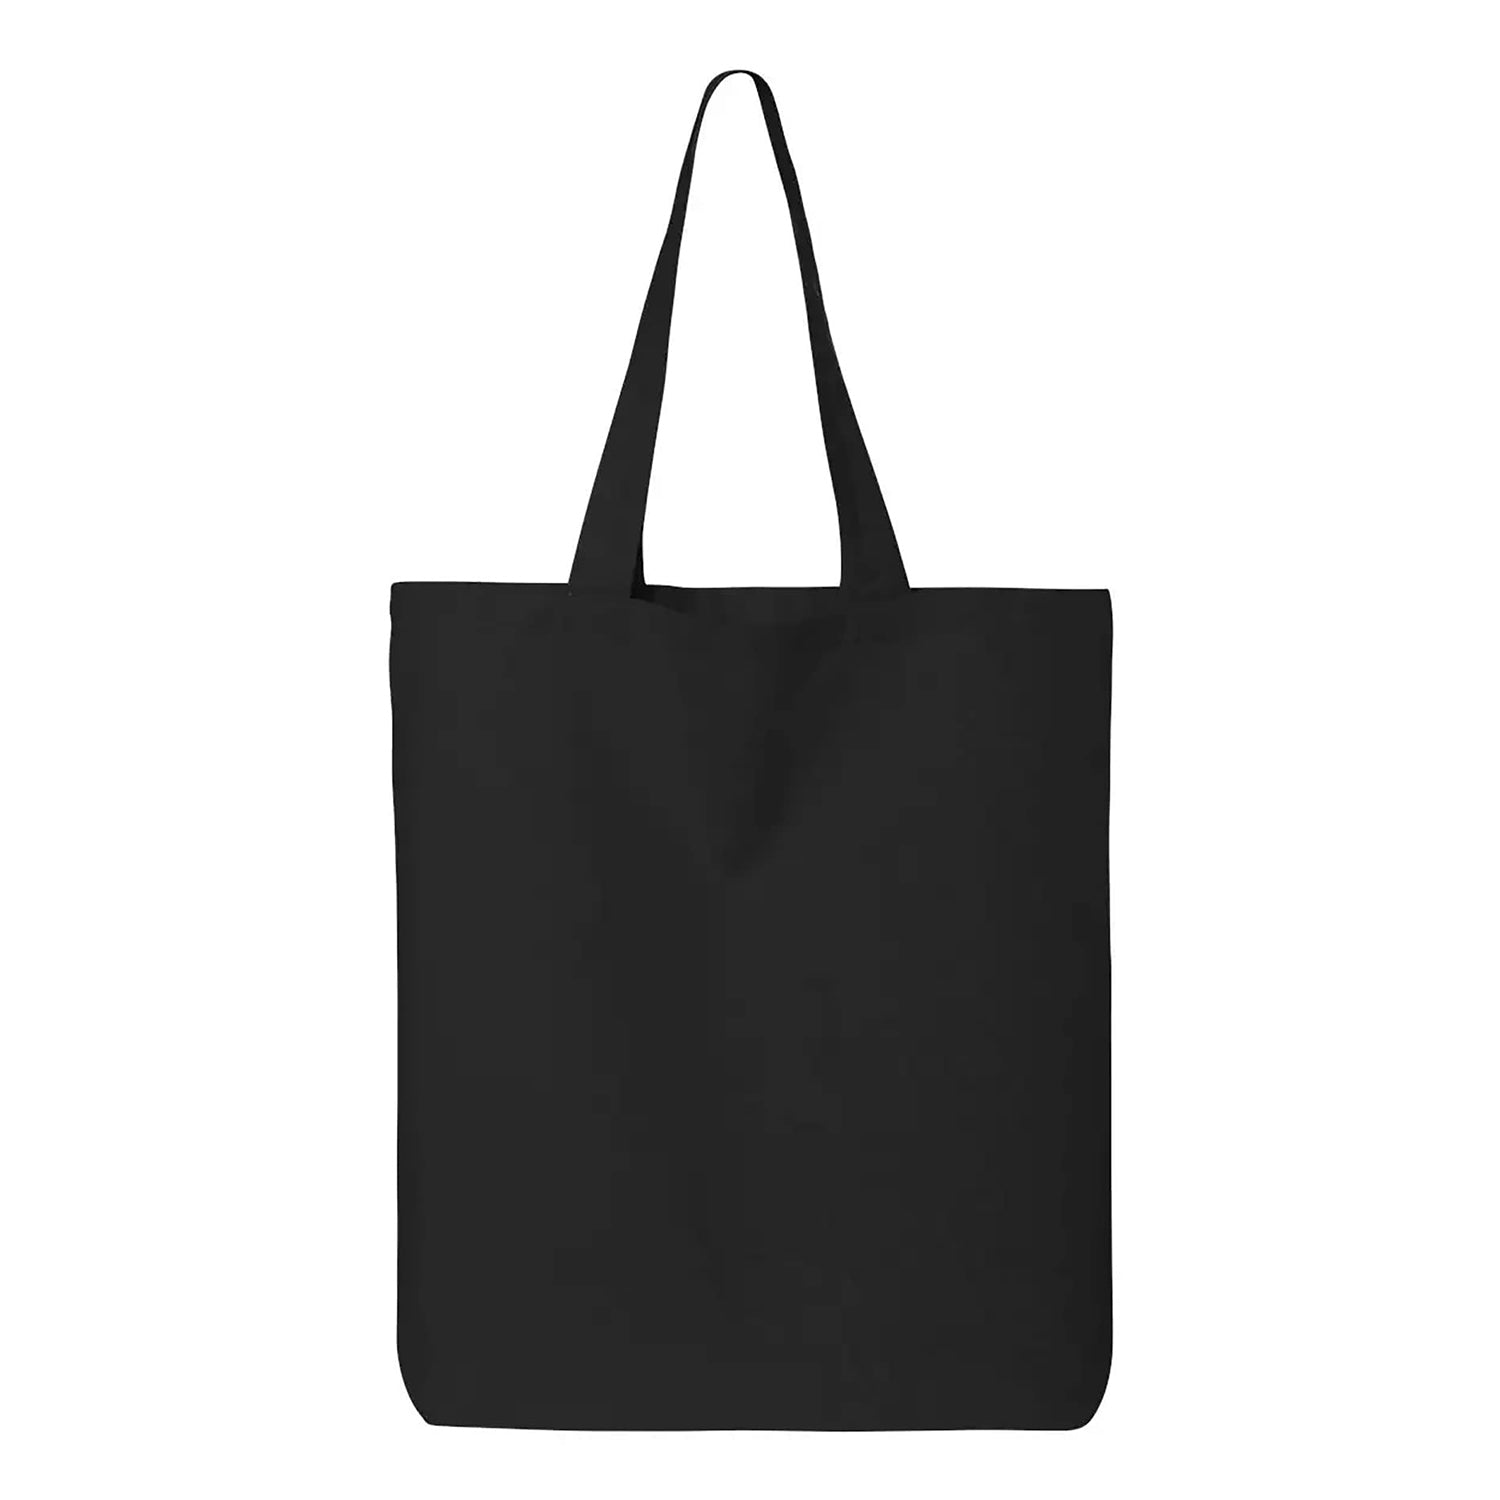 Custom Personalized Design Your Own Eco Cotton Tote Reusable Shopping Bag